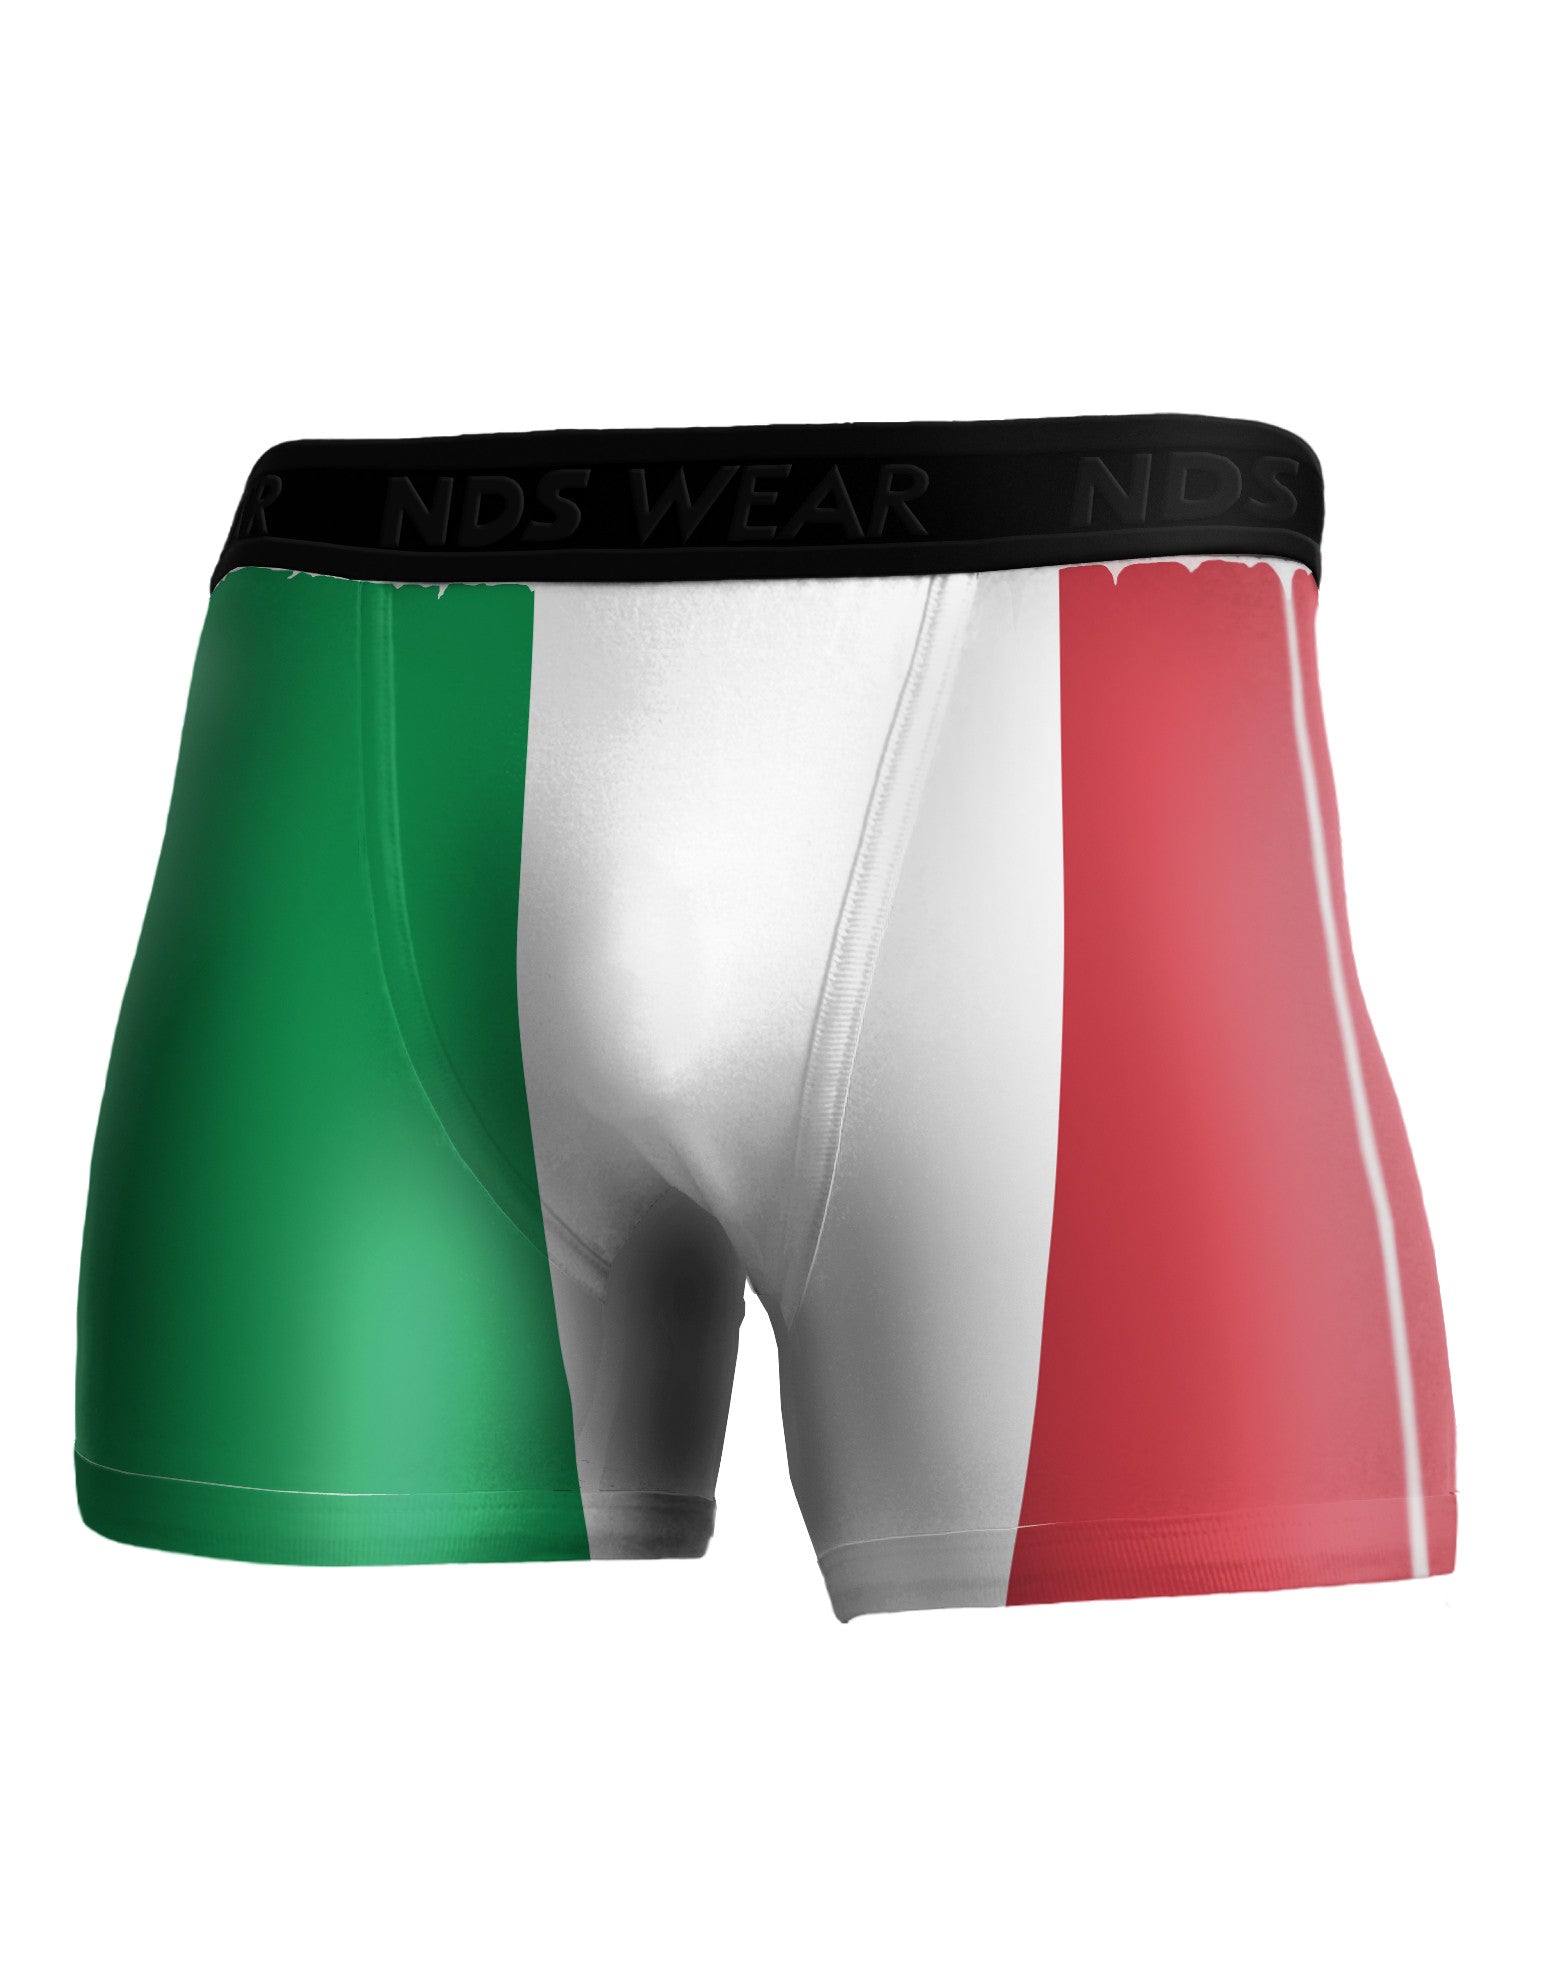 Italian Flag - Italy Mens NDS Wear Boxer Brief Underwear by TooLoud